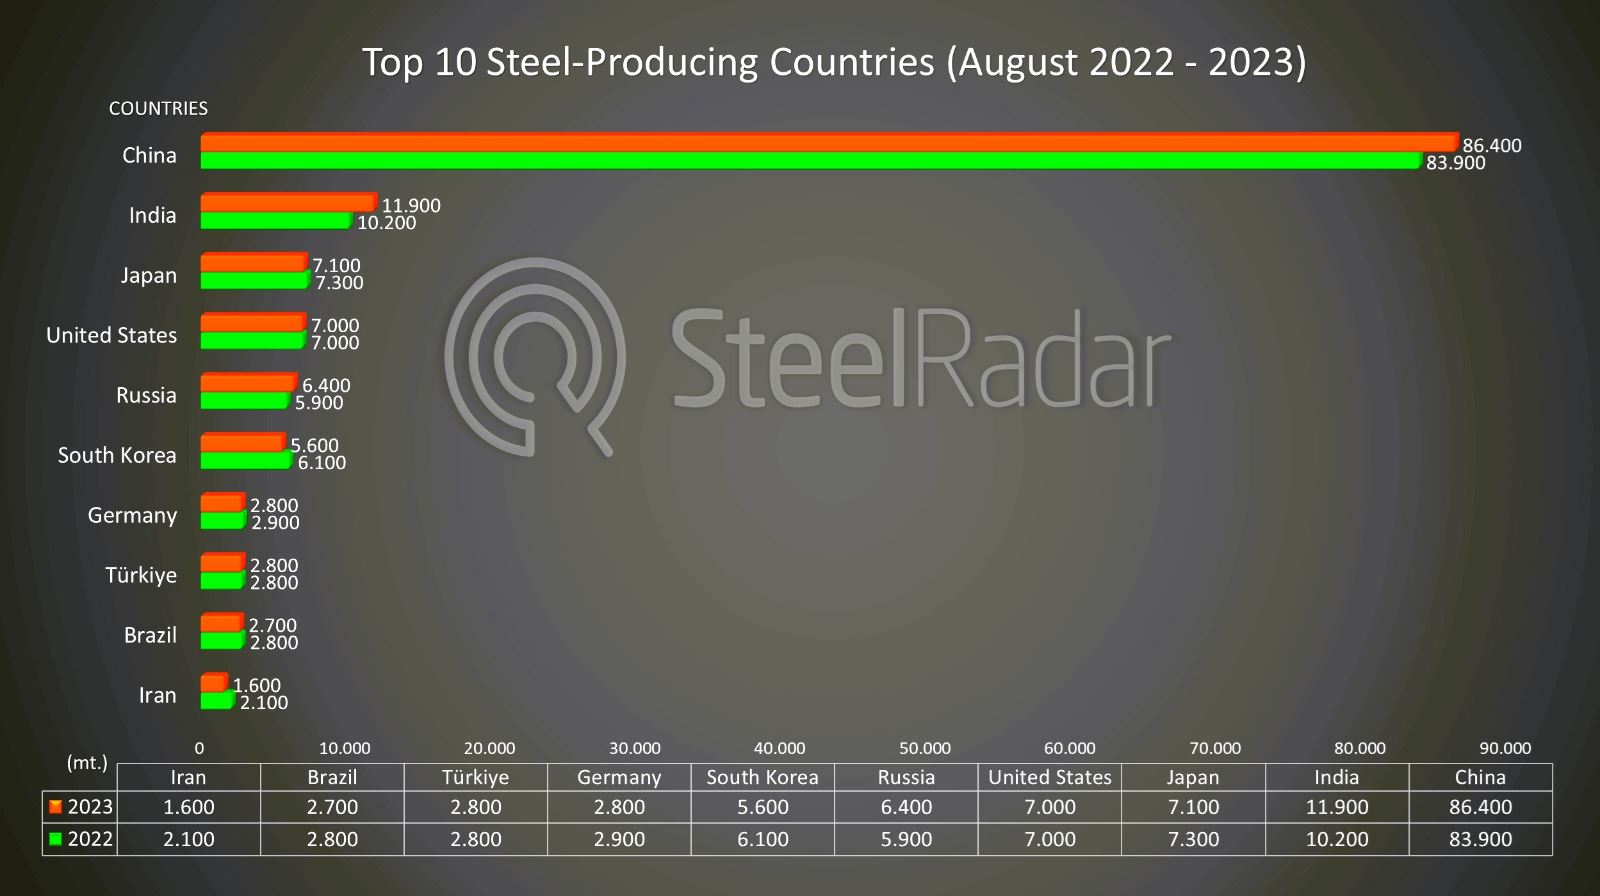 World steel production increased in August: Featured countries and changes